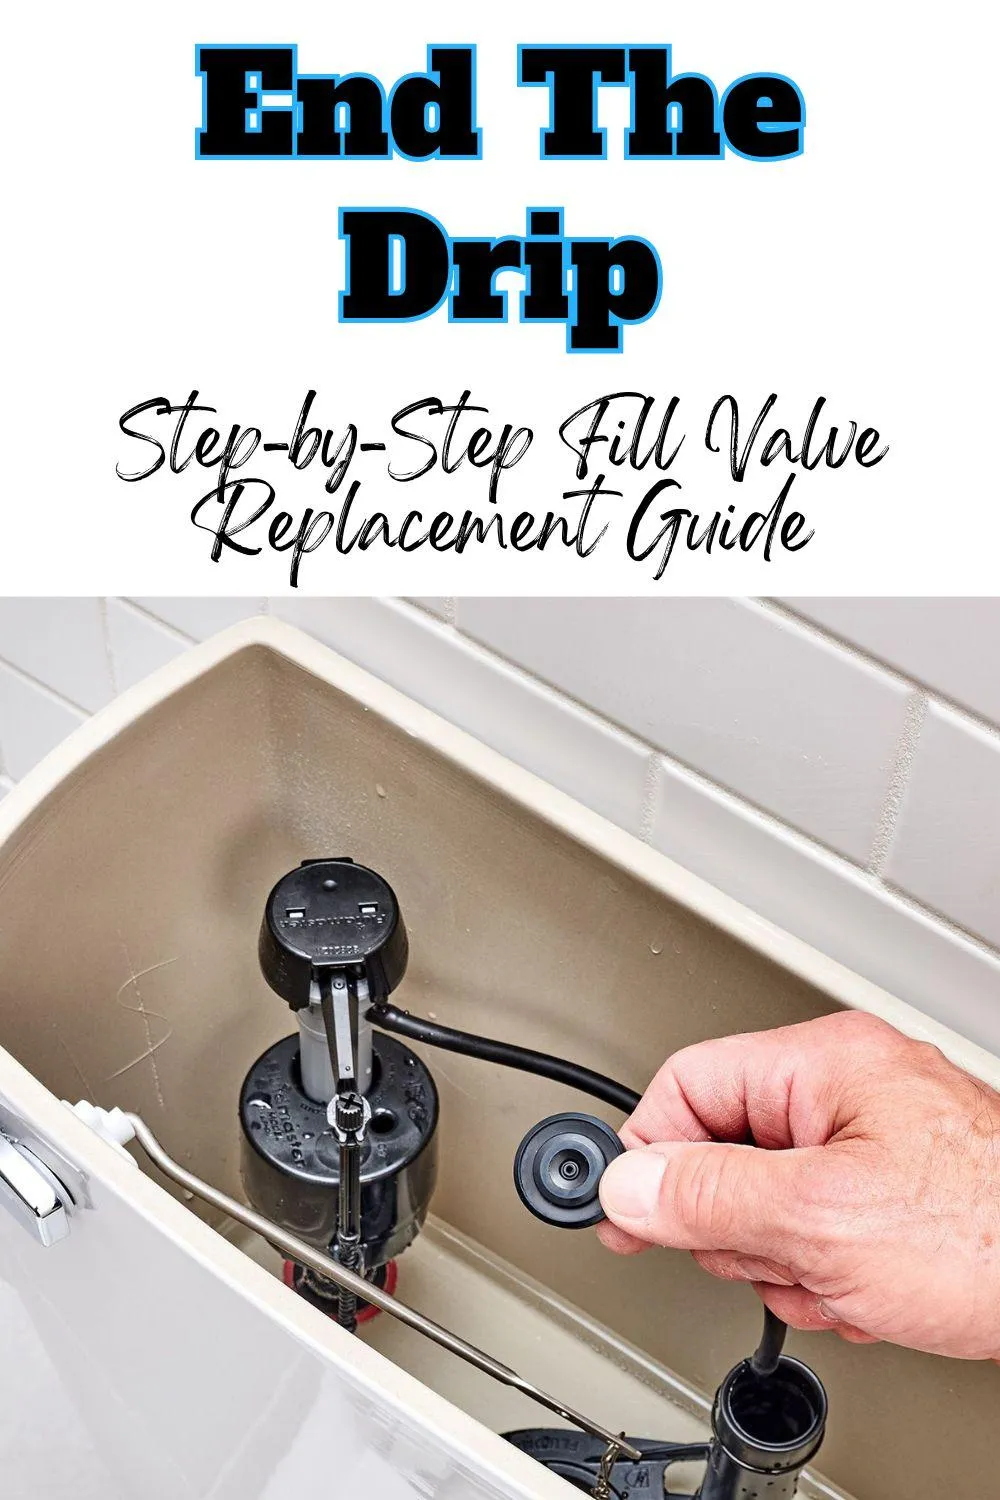 Quick DIY Fix for a Running Toilet: Replace the Fill Valve